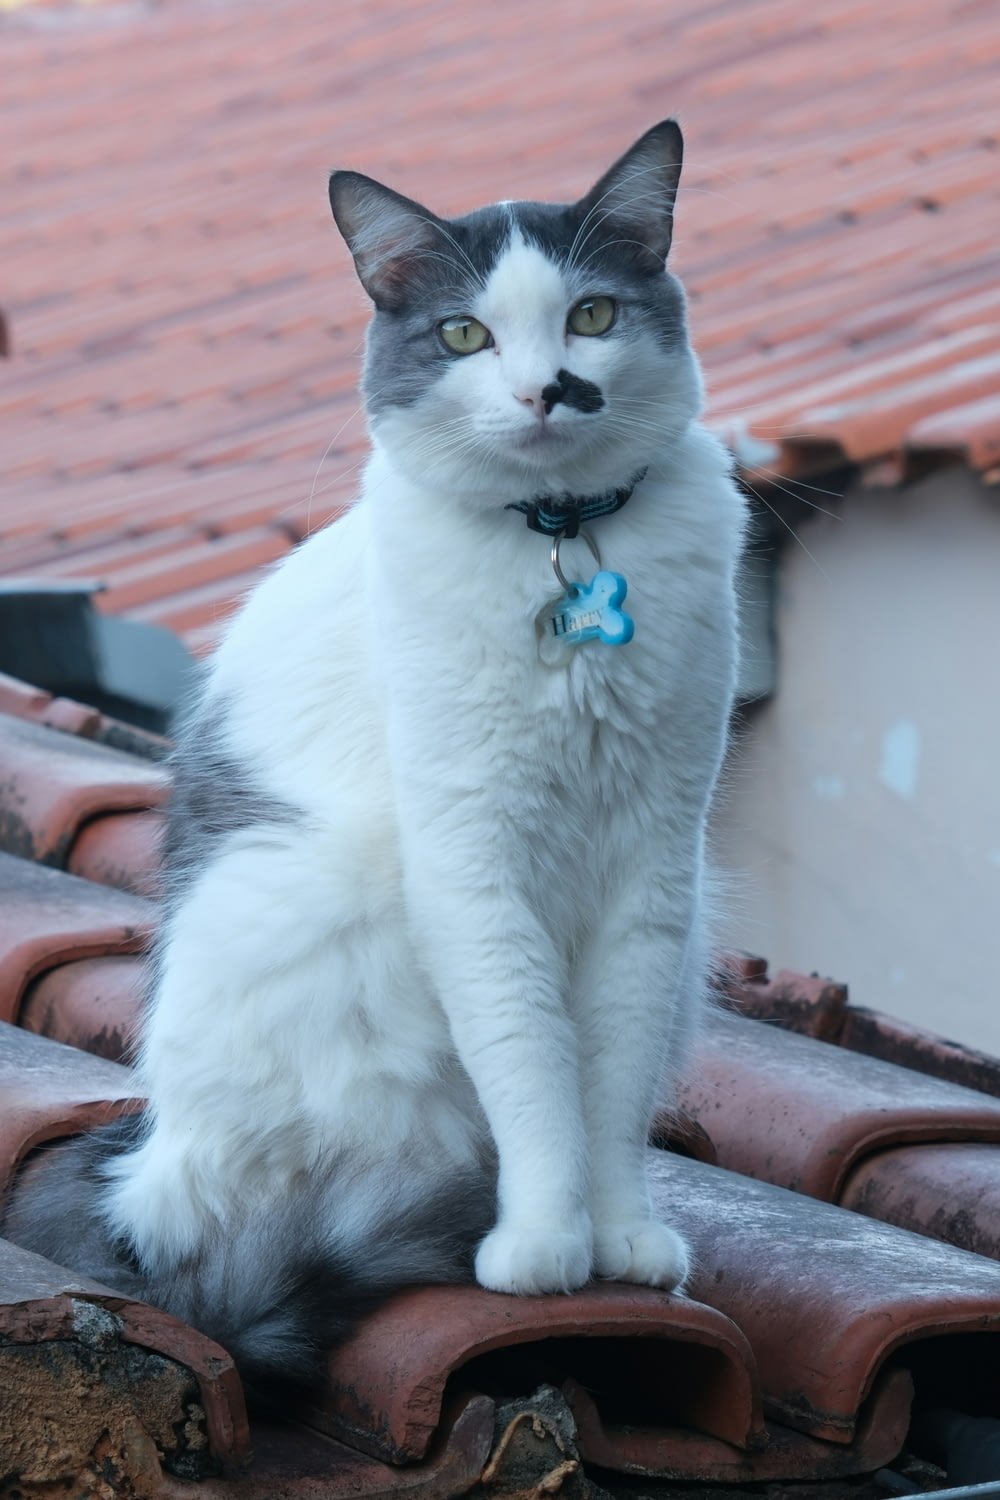 a cat sitting on top of a roof